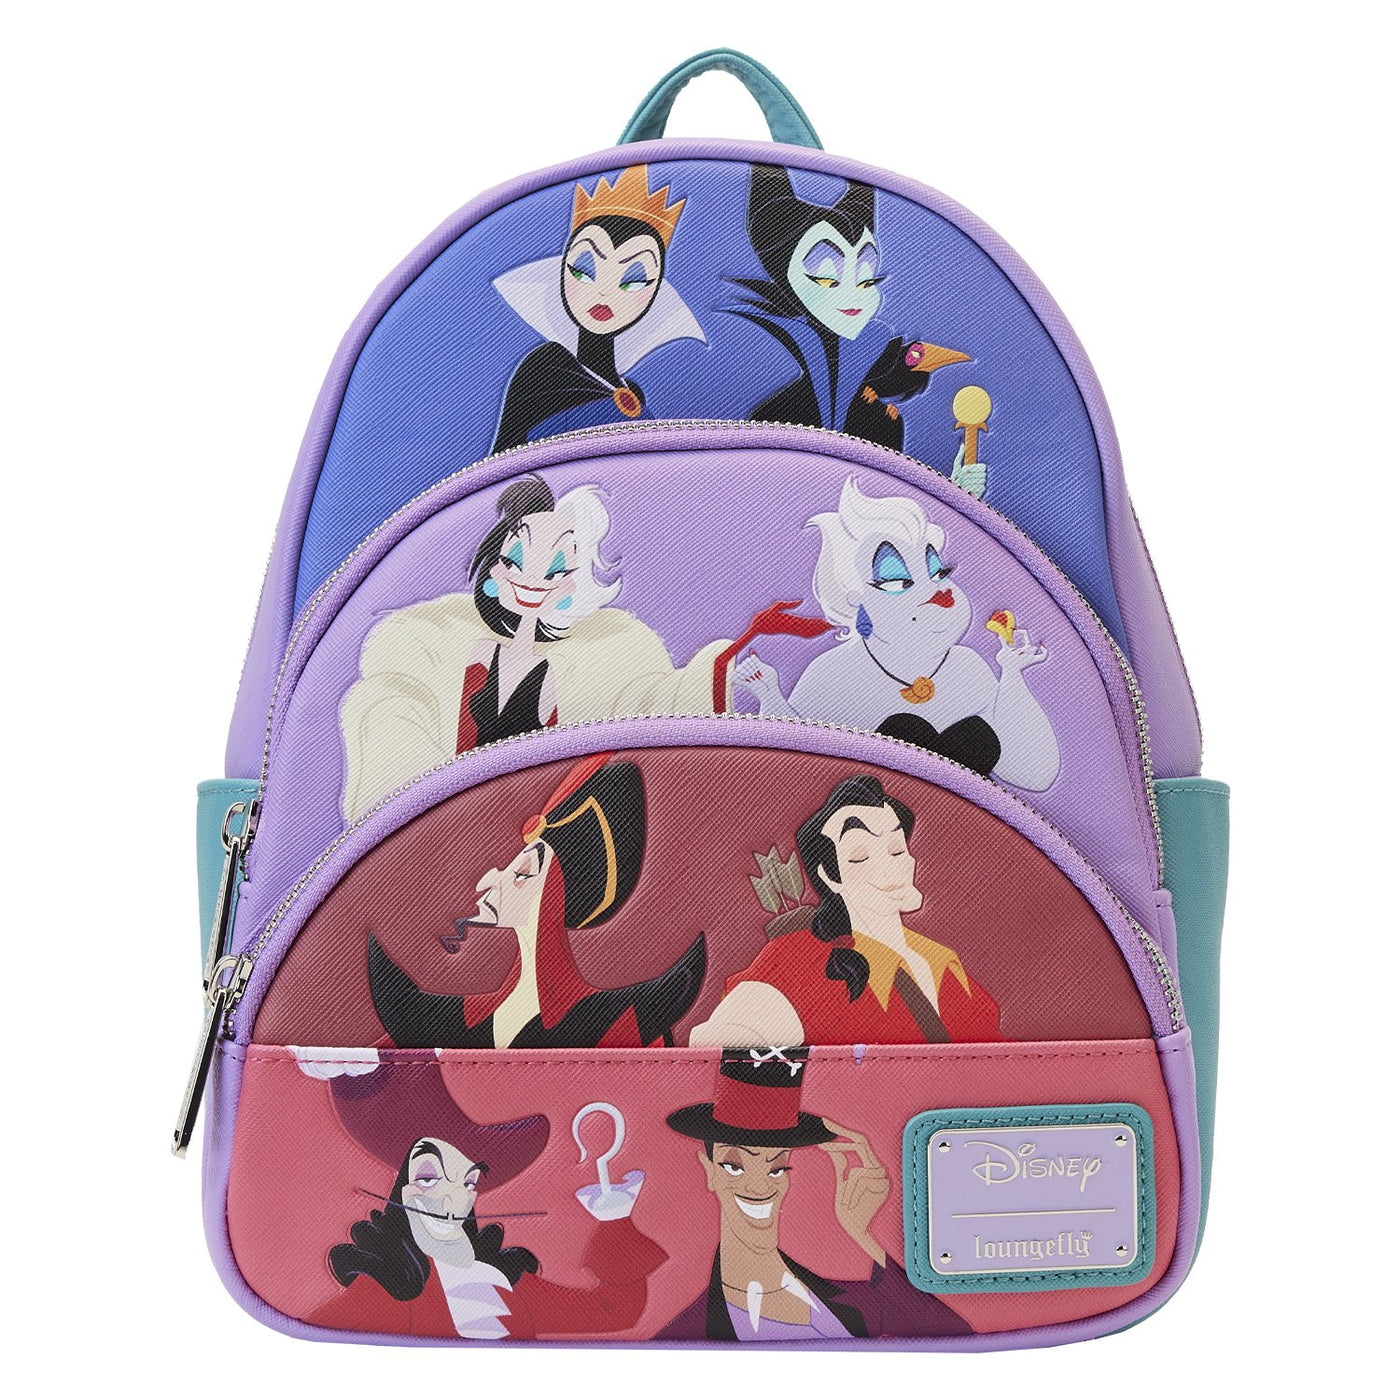 Loungefly Disney Villains Sequin Ursula Cosplay Mini Backpack